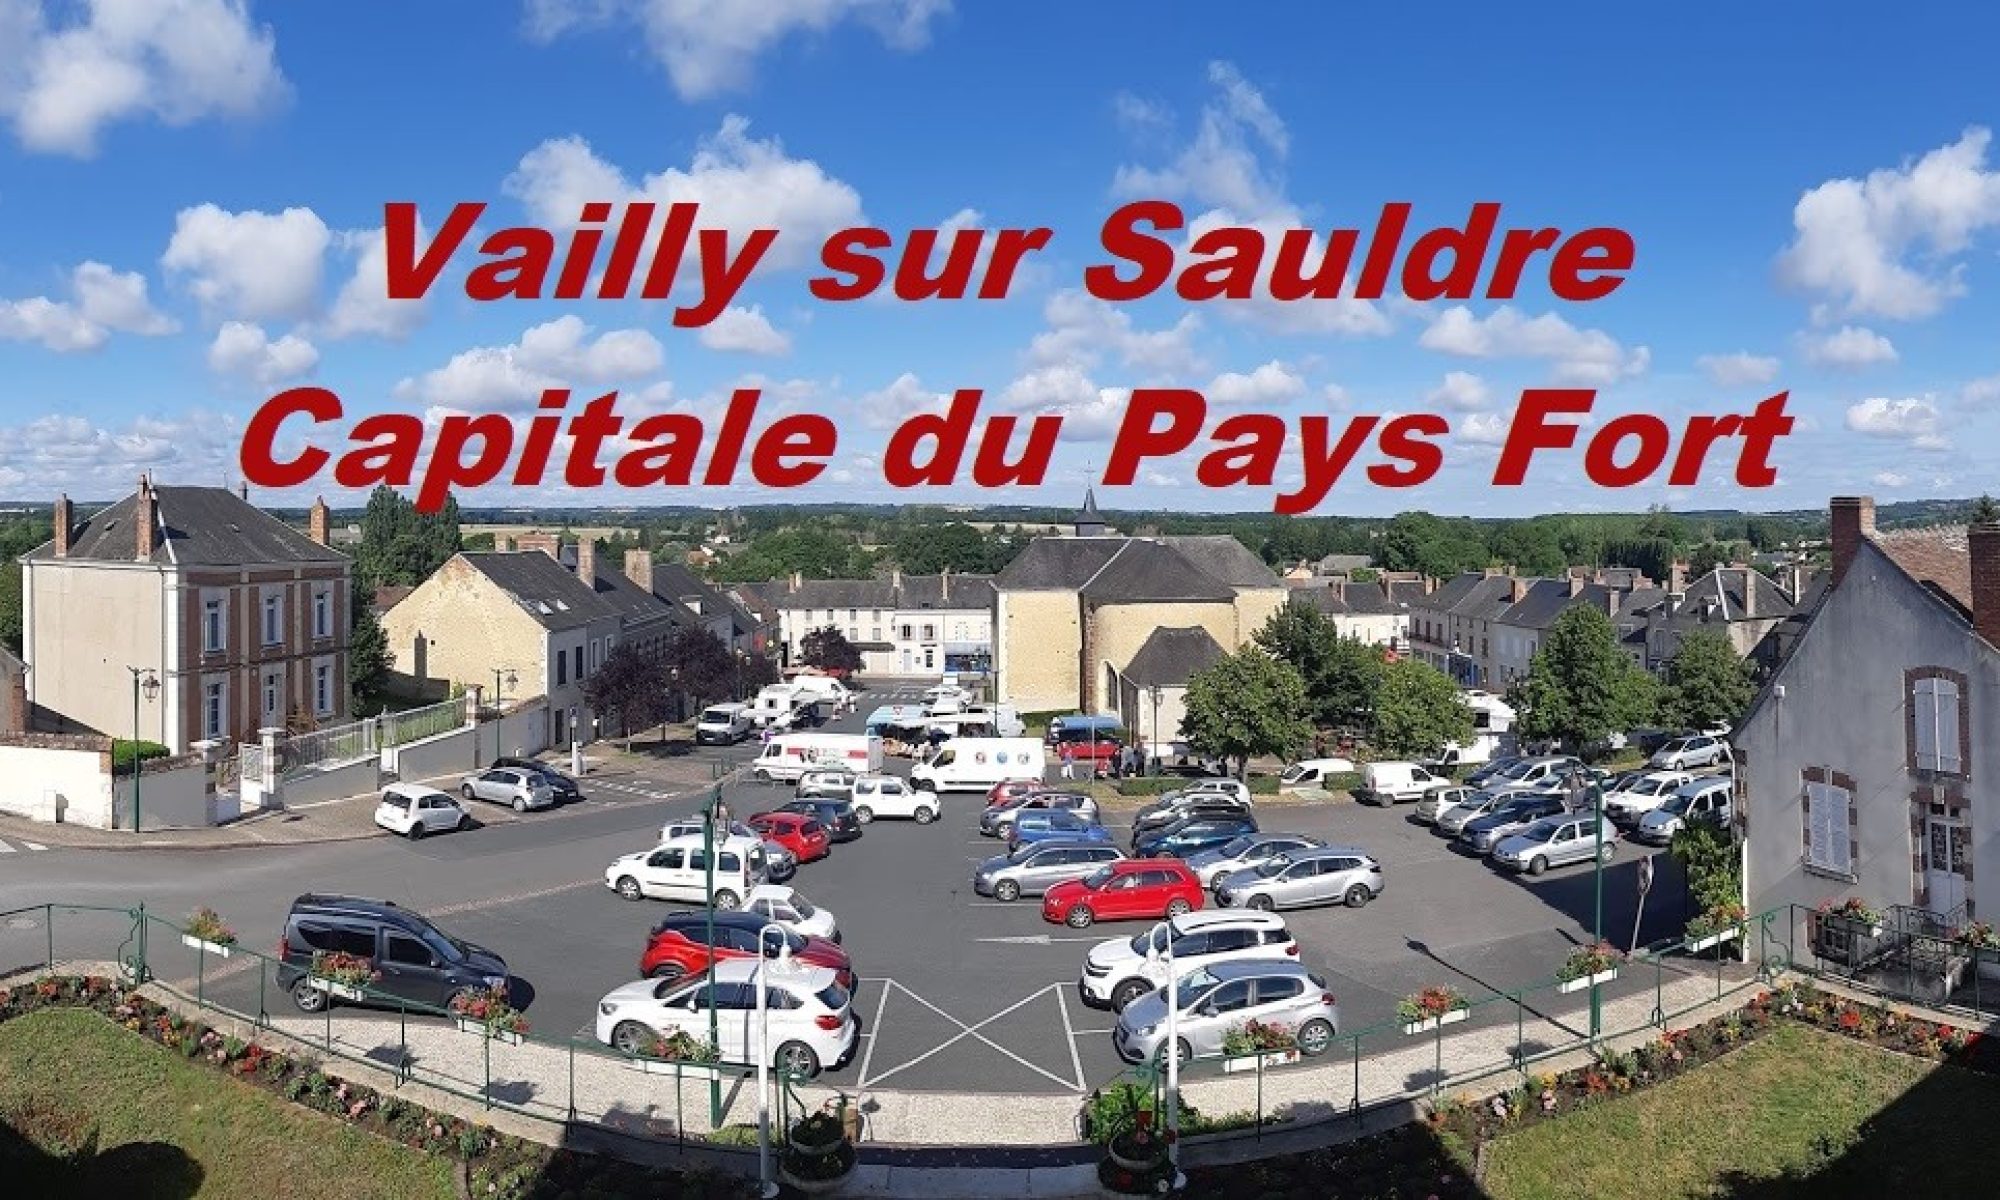 VAILLY-sur-Sauldre